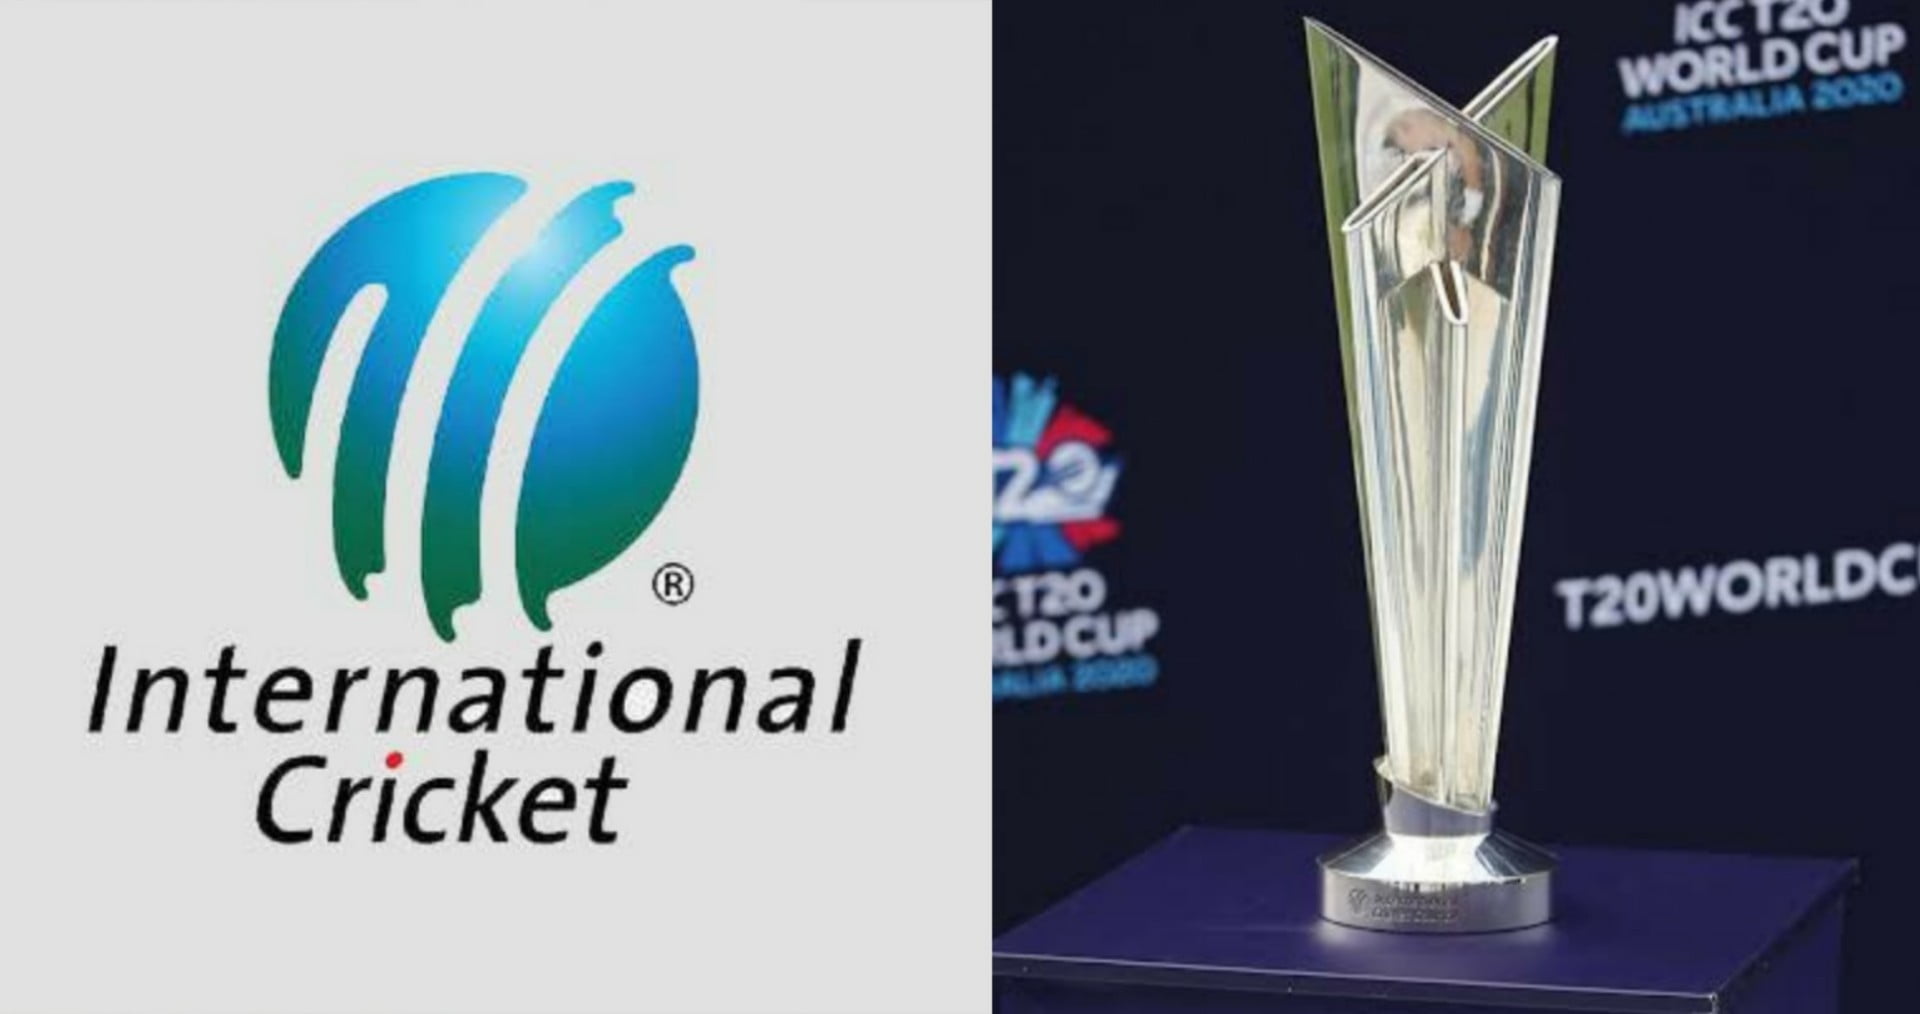 ICC discusses T20 World Cup future, Australia Reported to Rehost in 2022